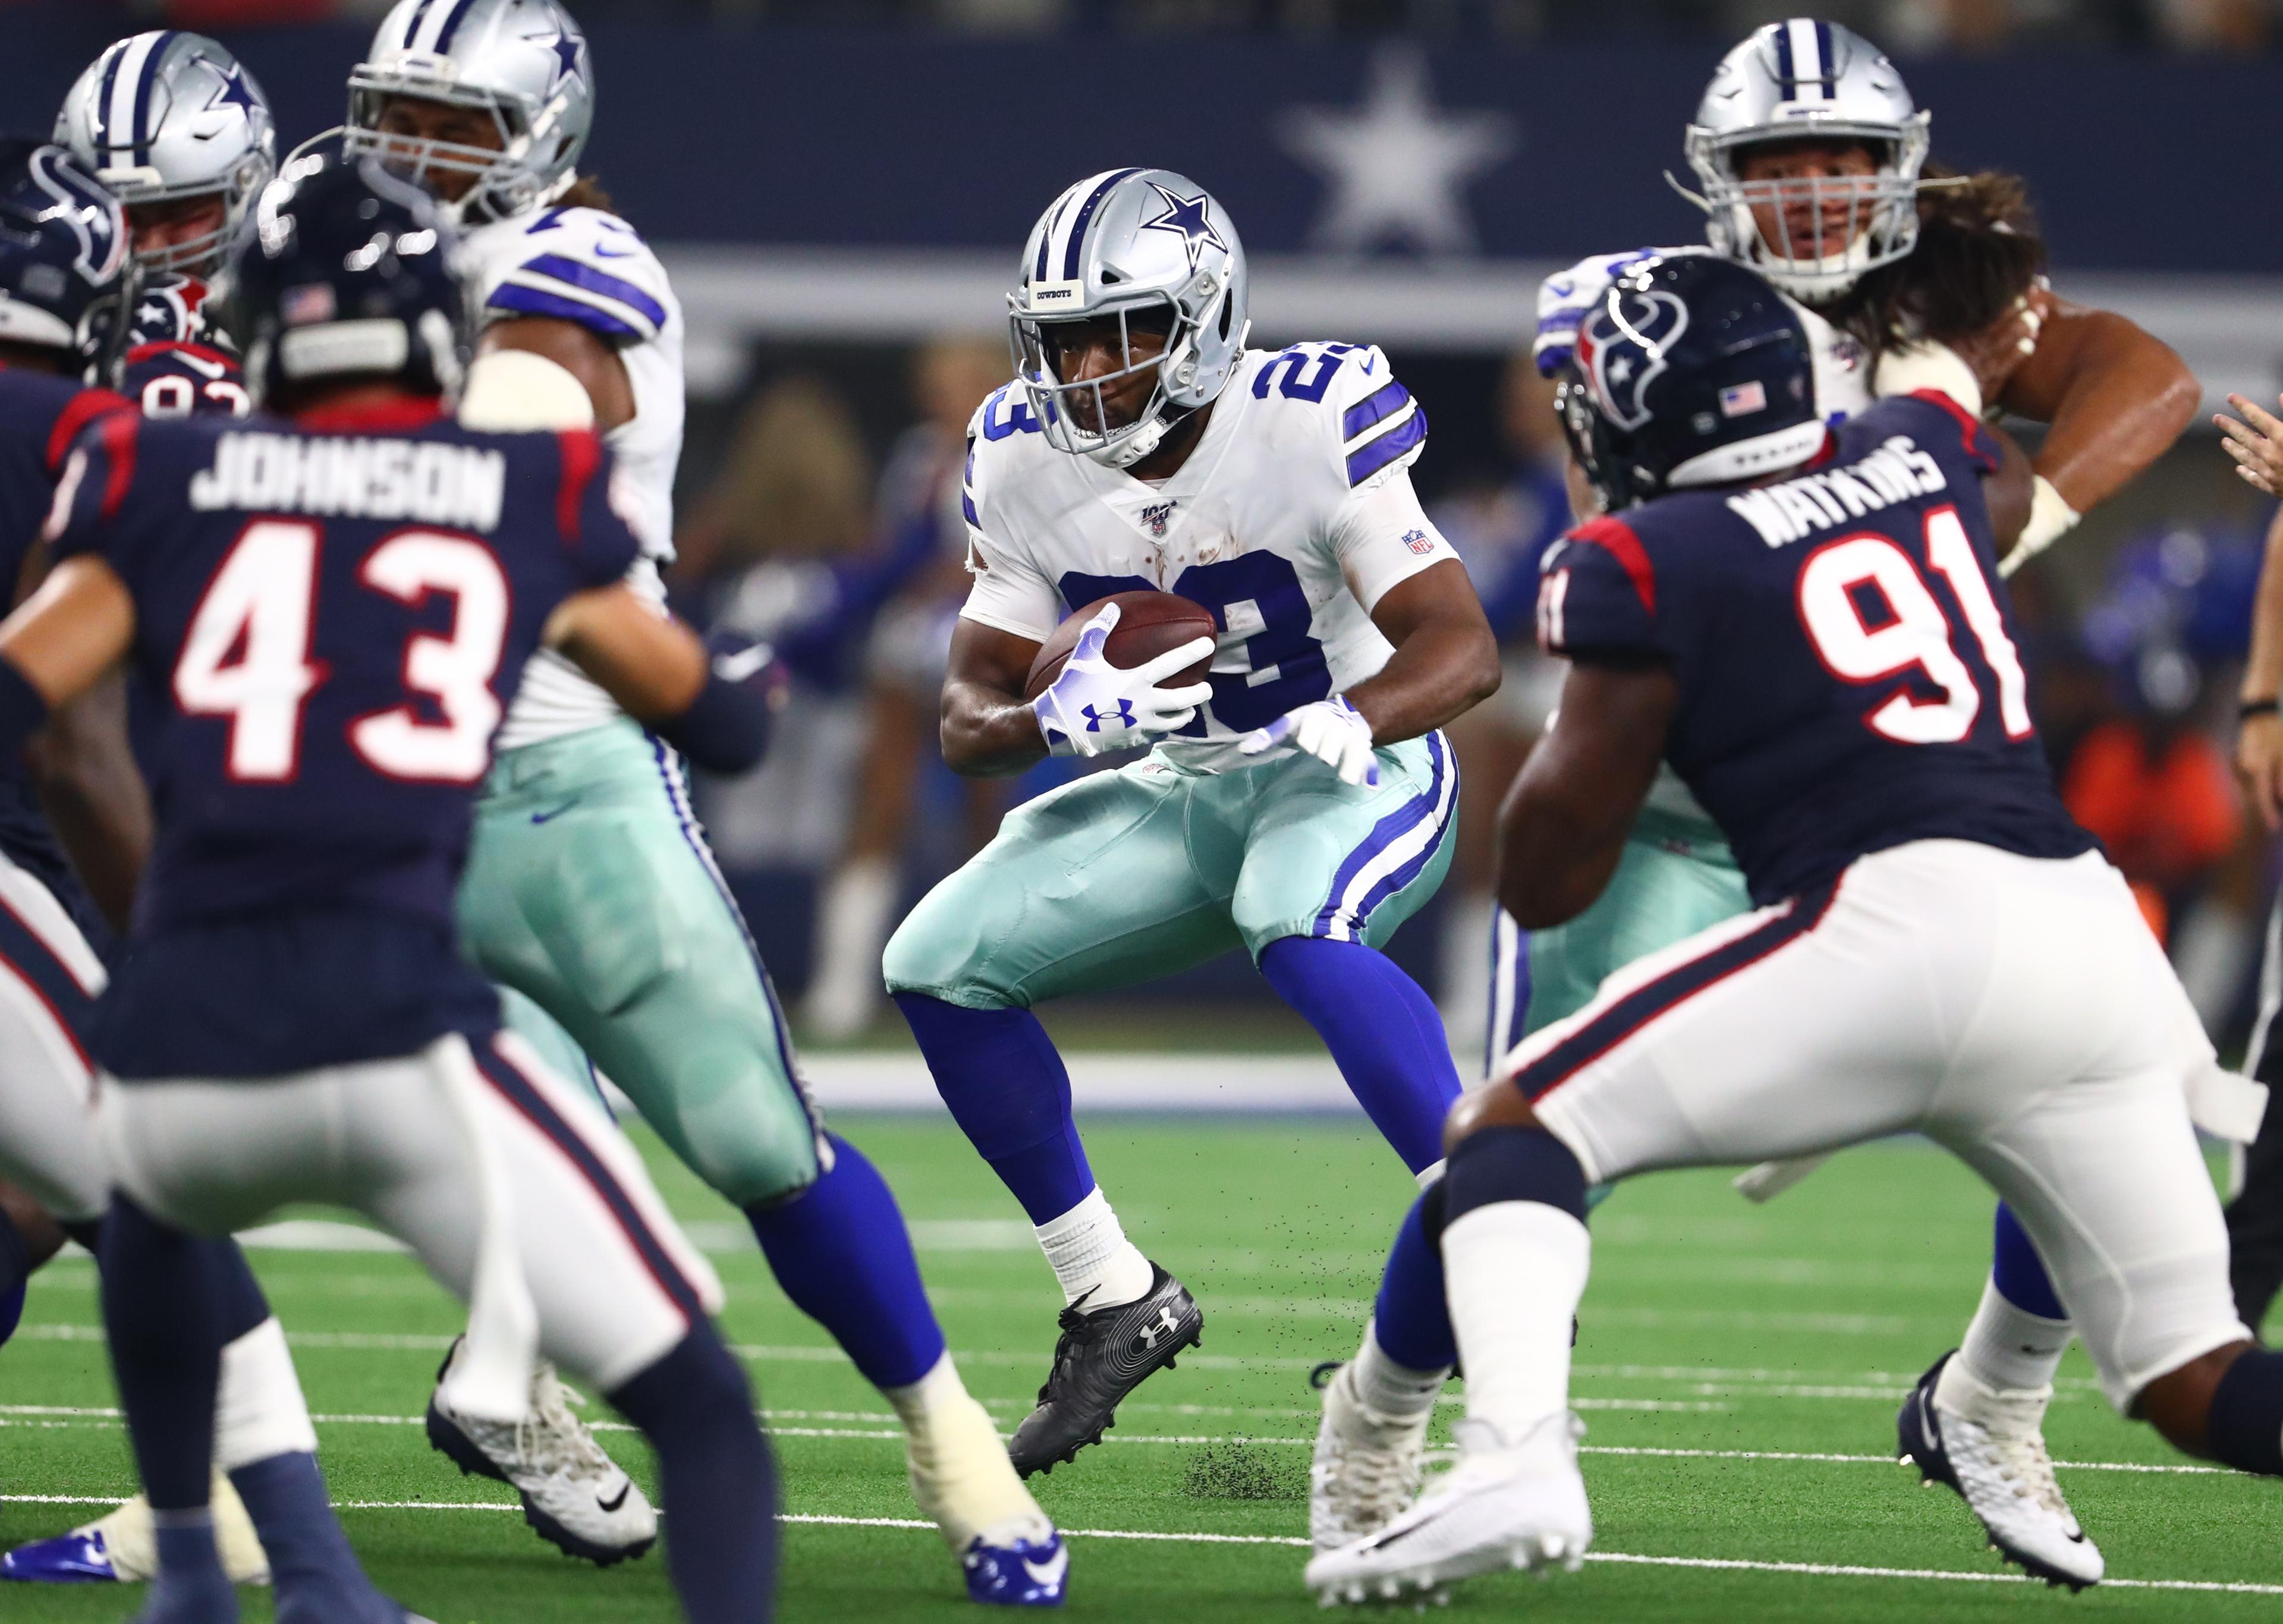 Aug 24, 2019; Arlington, TX, USA; Dallas Cowboys running back Alfred Morris (23) runs with the ball in the second quarter against the Houston Texans at AT&T Stadium. Mandatory Credit: Matthew Emmons-USA TODAY Sports / © Matthew Emmons-USA TODAY Sports